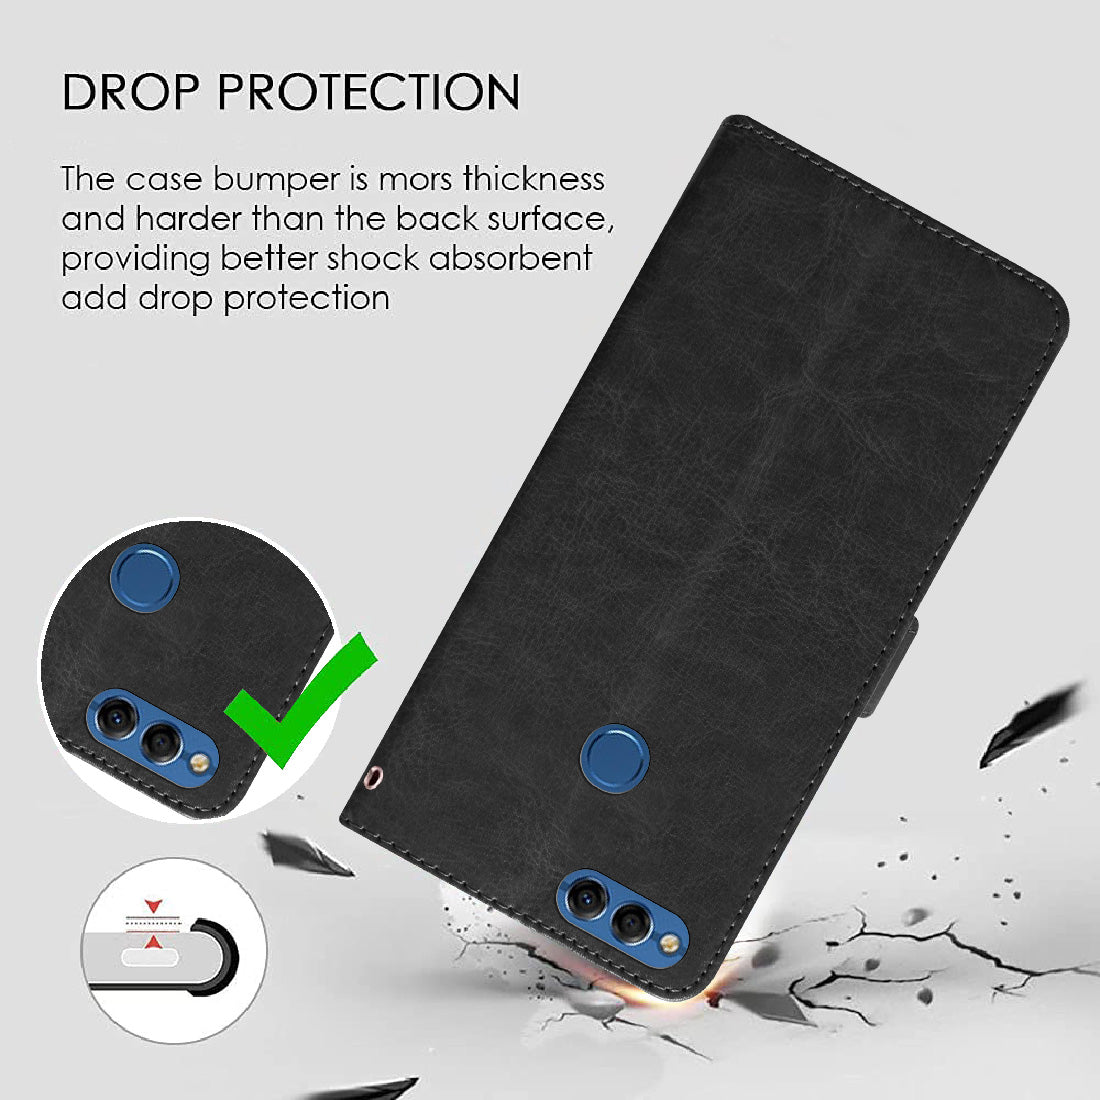 Premium Wallet Flip Cover for Huawei Honor 7X